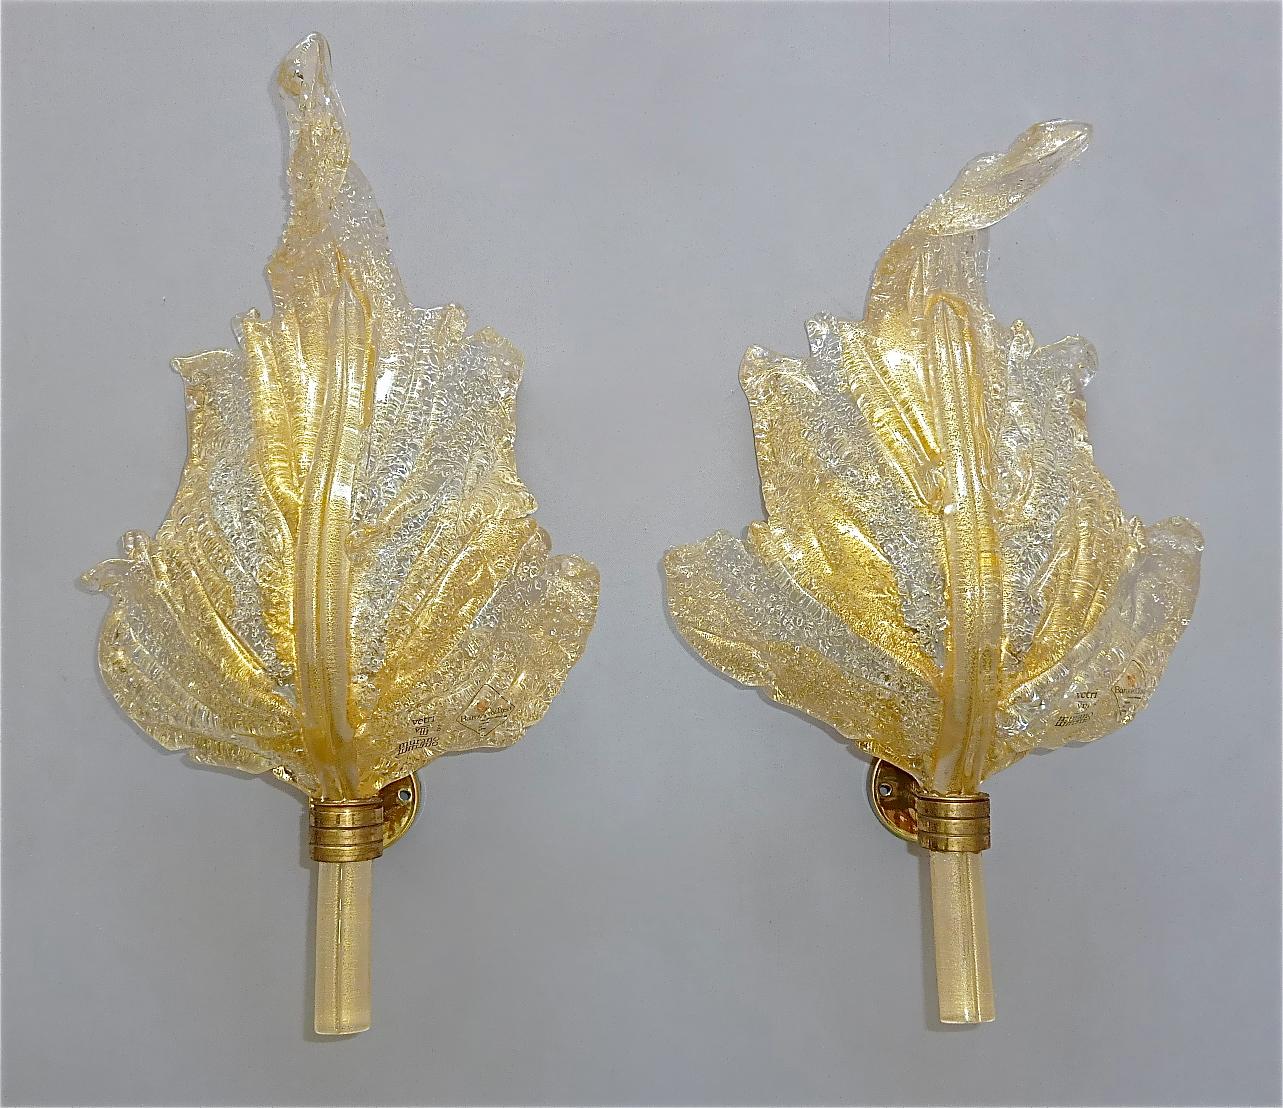 Fabulous pair of Barovier & Toso Murano art glass floral leaf sconces or wall lights, Italy circa 1970s. They have a beautifully hand-crafted floral leaf shape and they are made in 